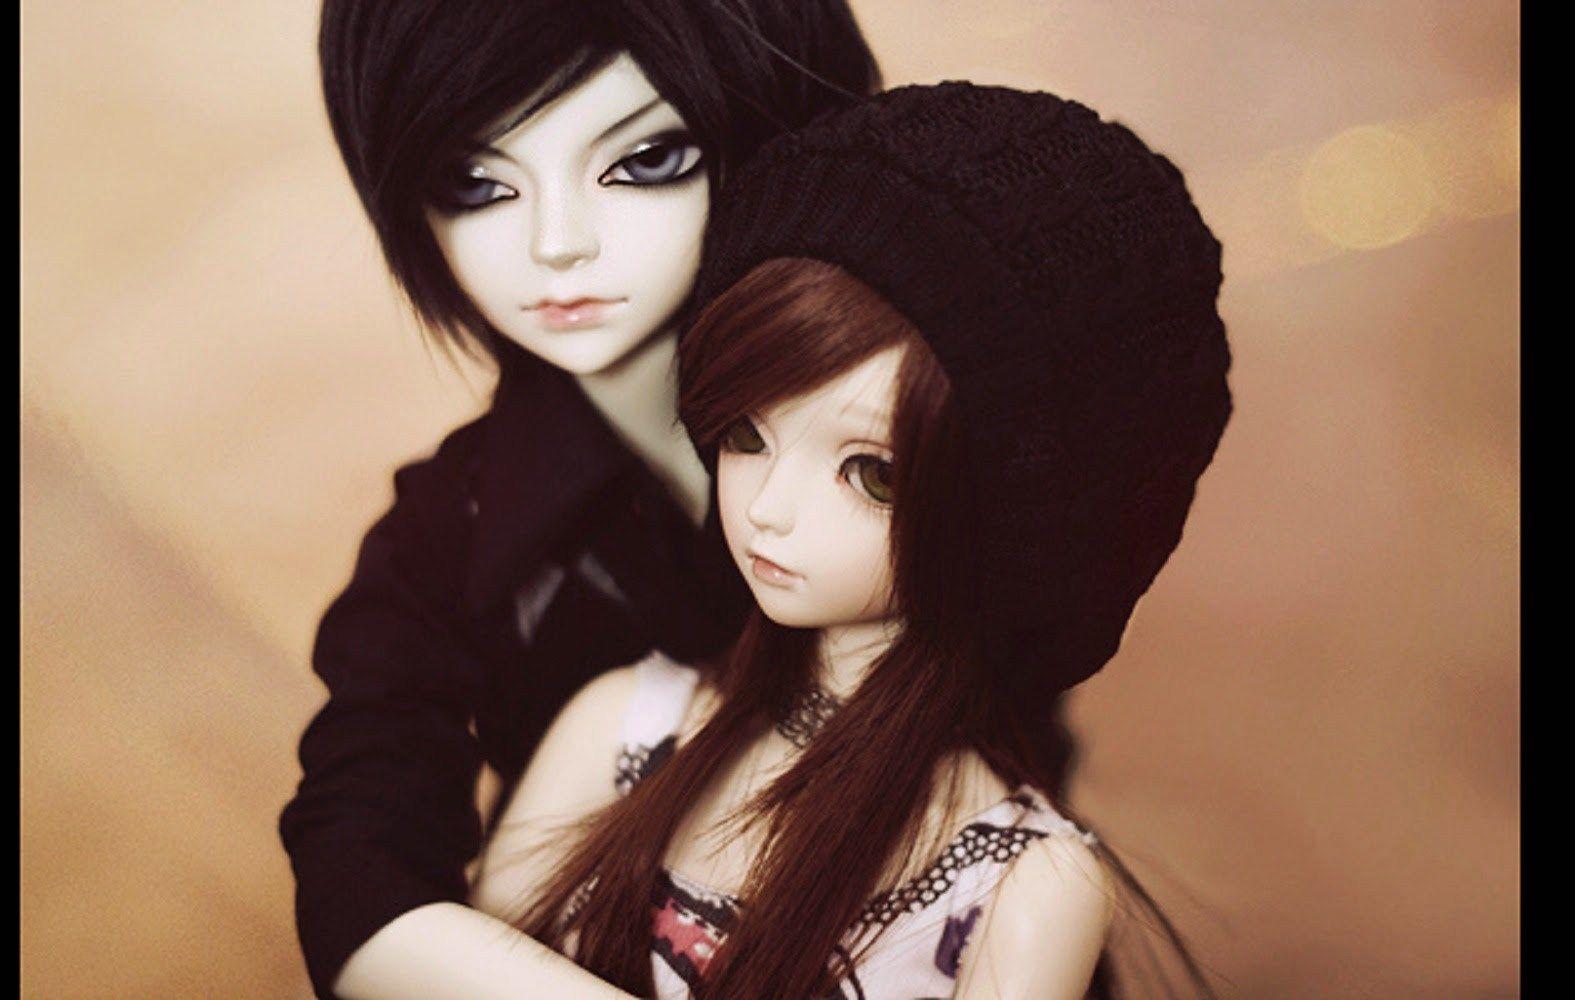 Couple Doll Wallpapers - Wallpaper Cave